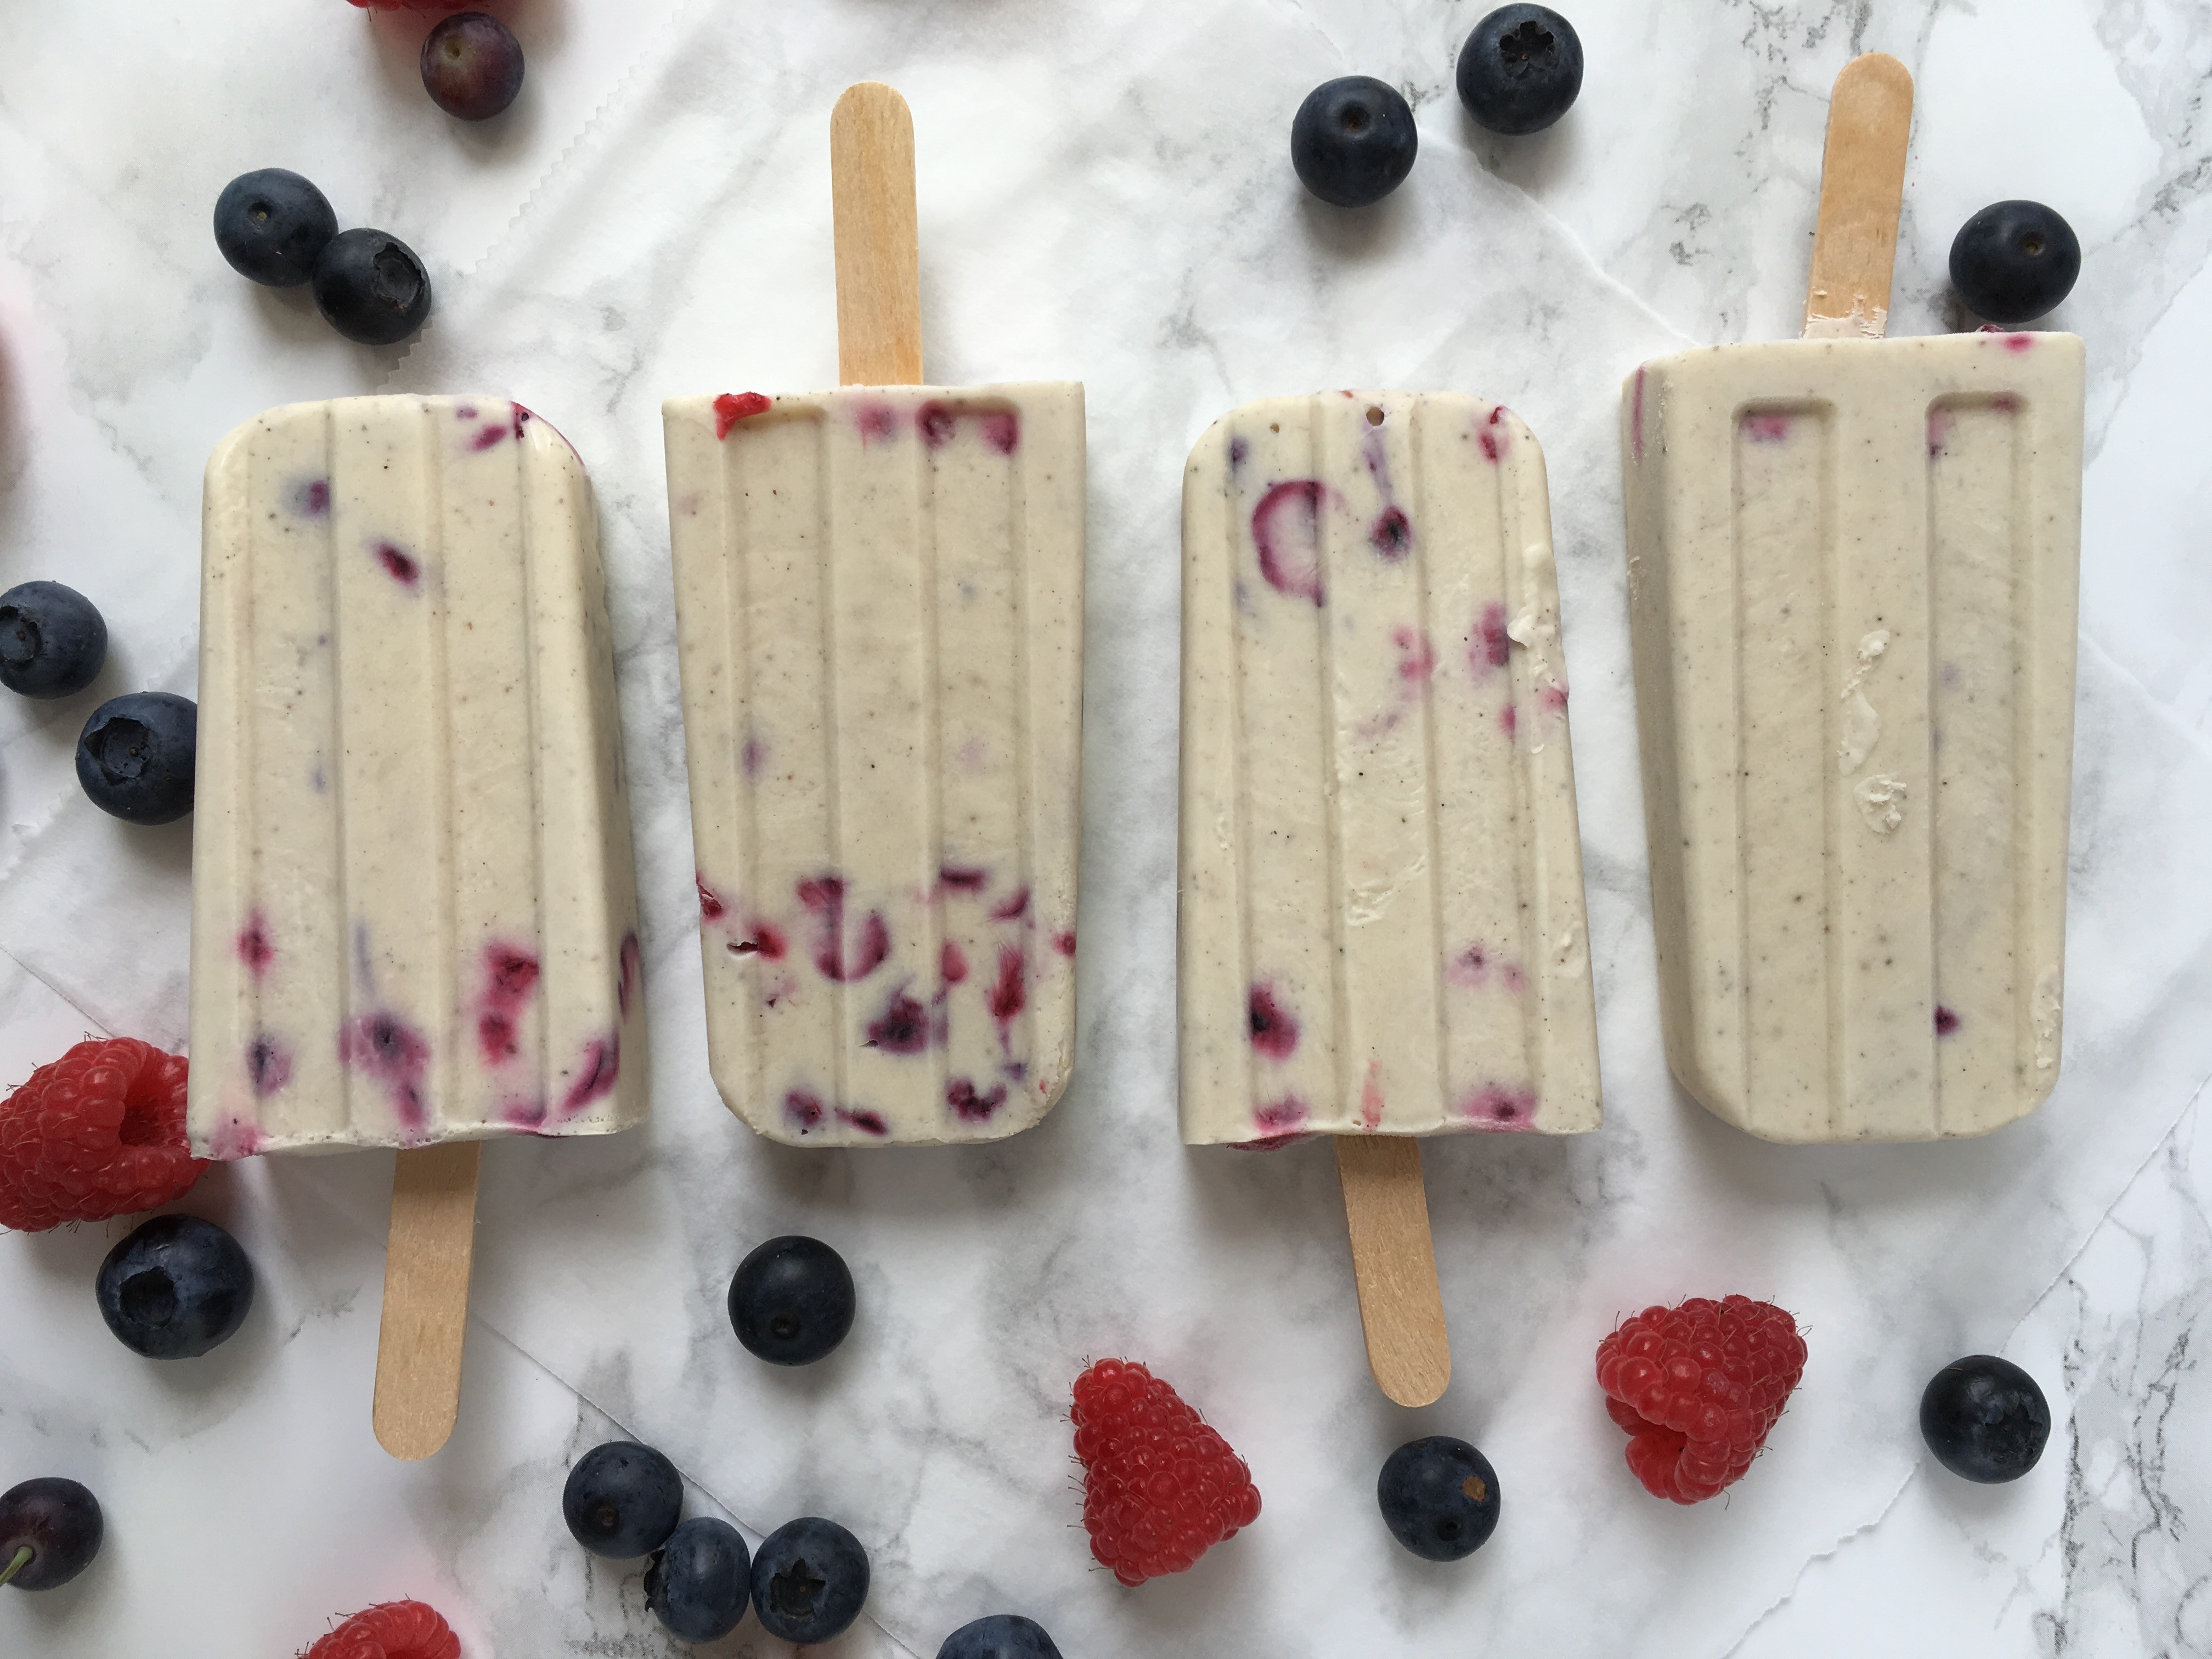 Low Histamine White Chocolate Popsicle's